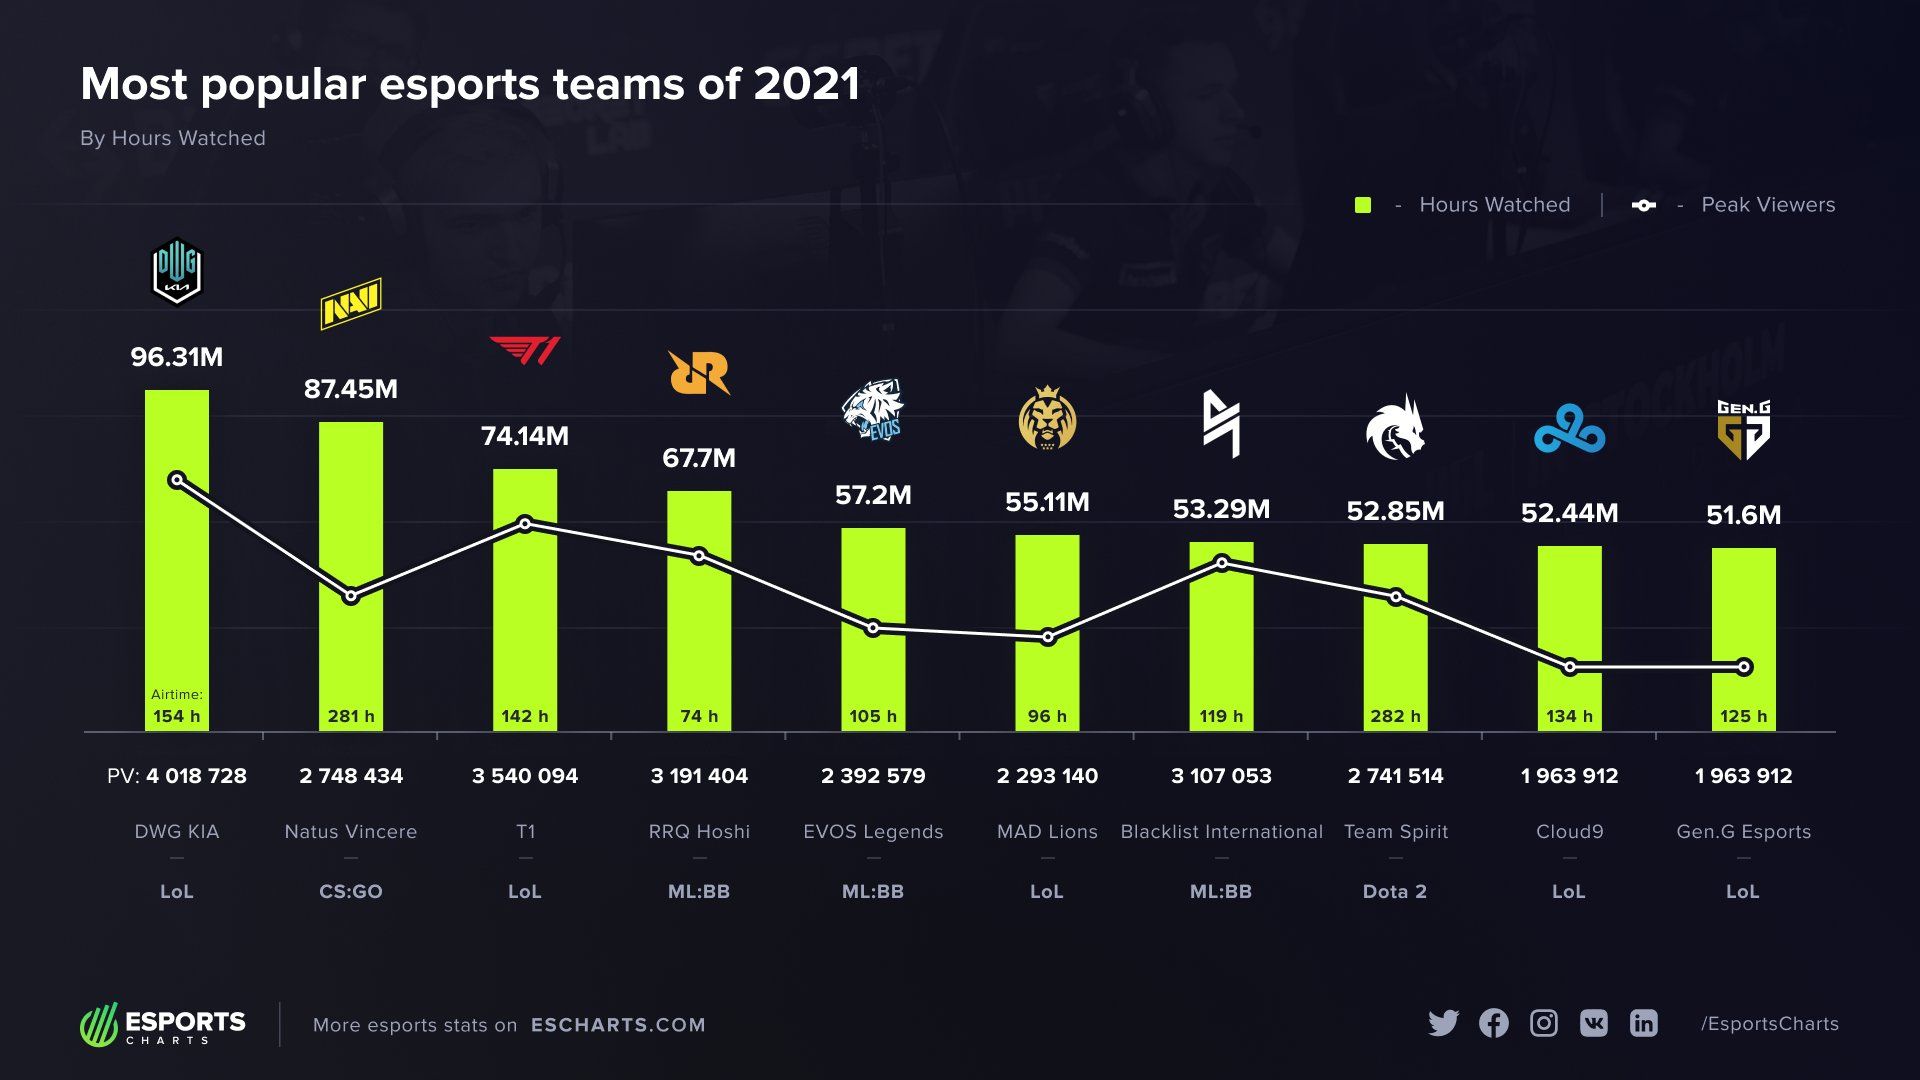 Most watched teams according to Esports Charts.